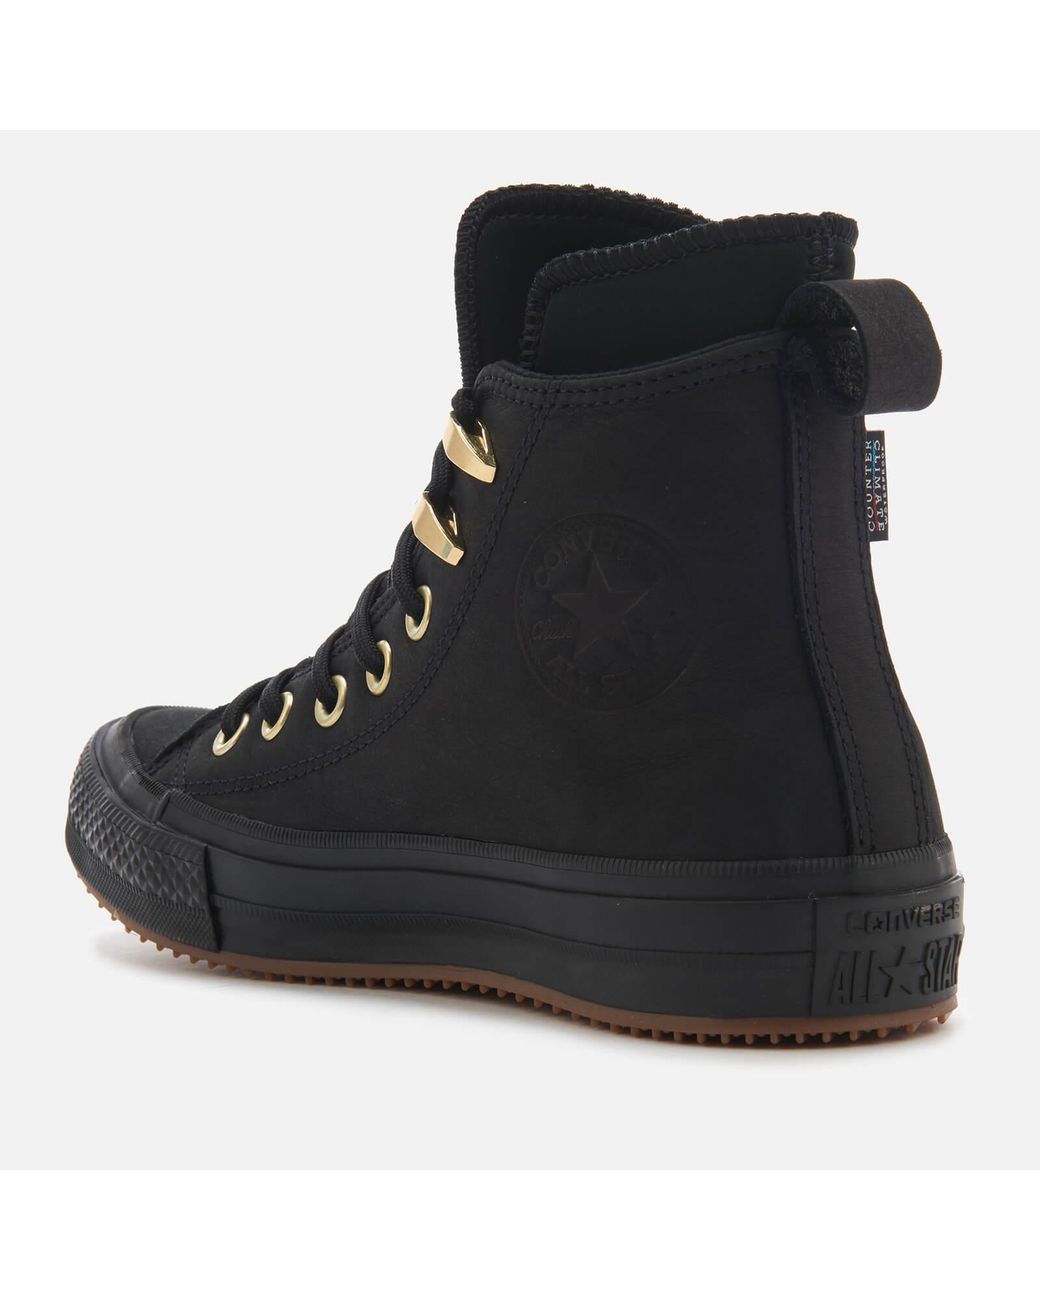 Converse Rubber Chuck Taylor All Star Waterproof Boots in Black | Lyst UK